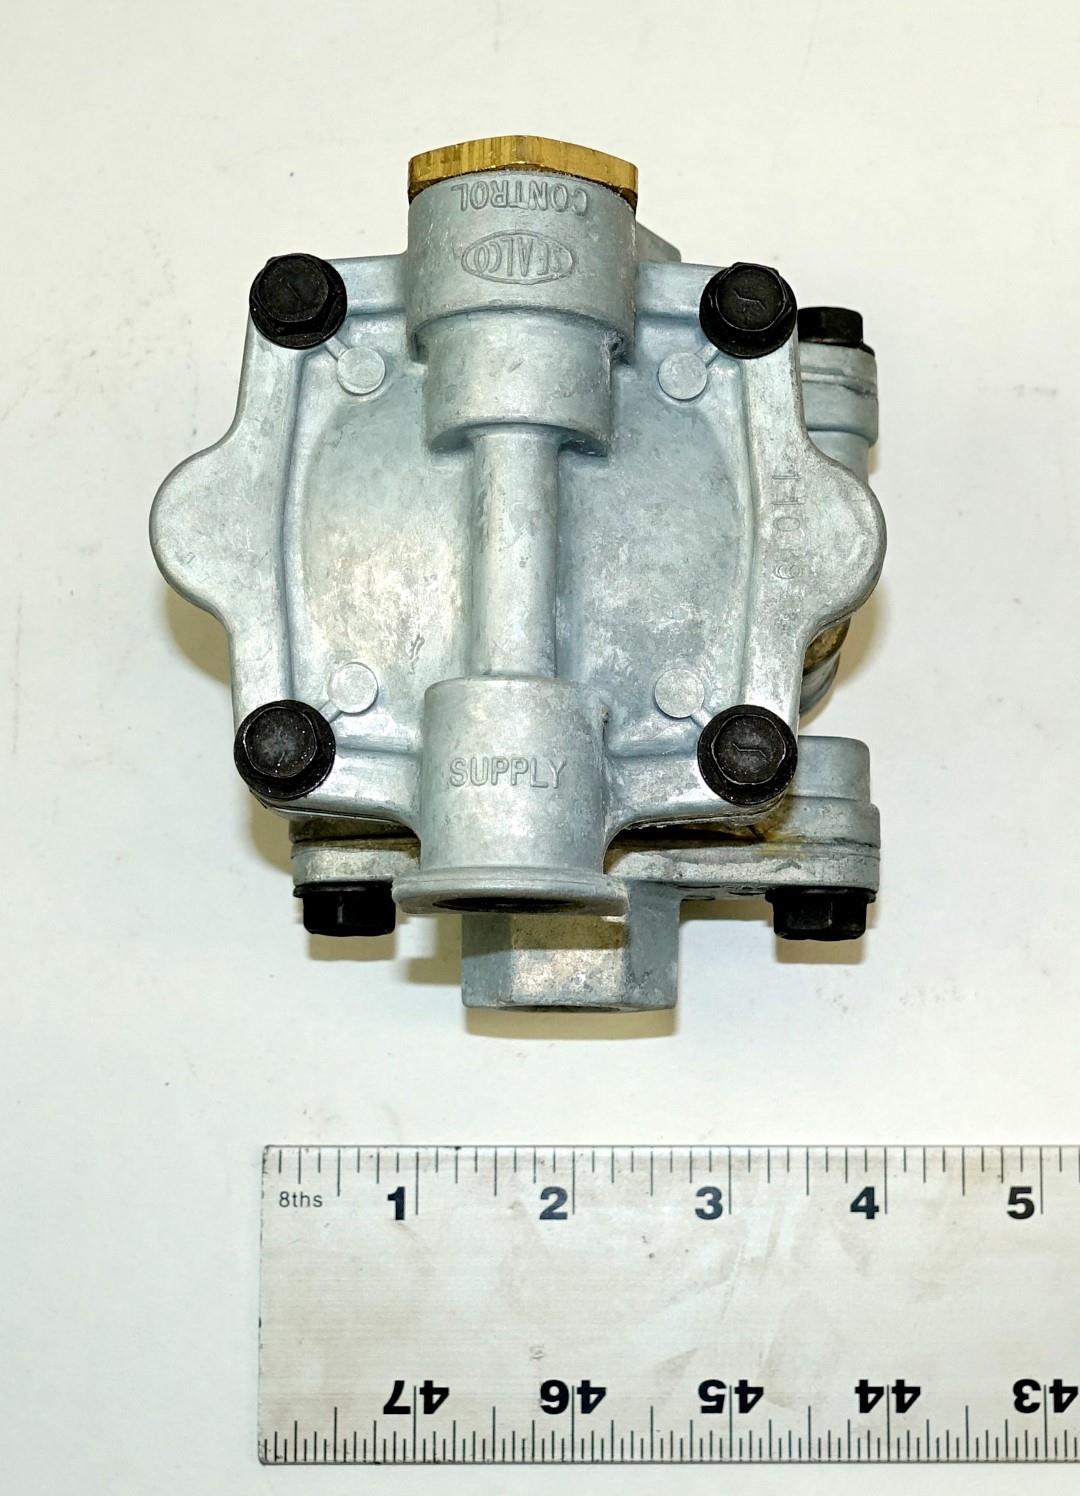 SP-1989 | 2530-01-358-6041 Spring Brake Control Valve for Commercial Trucks and Trailers NOS (5).JPG